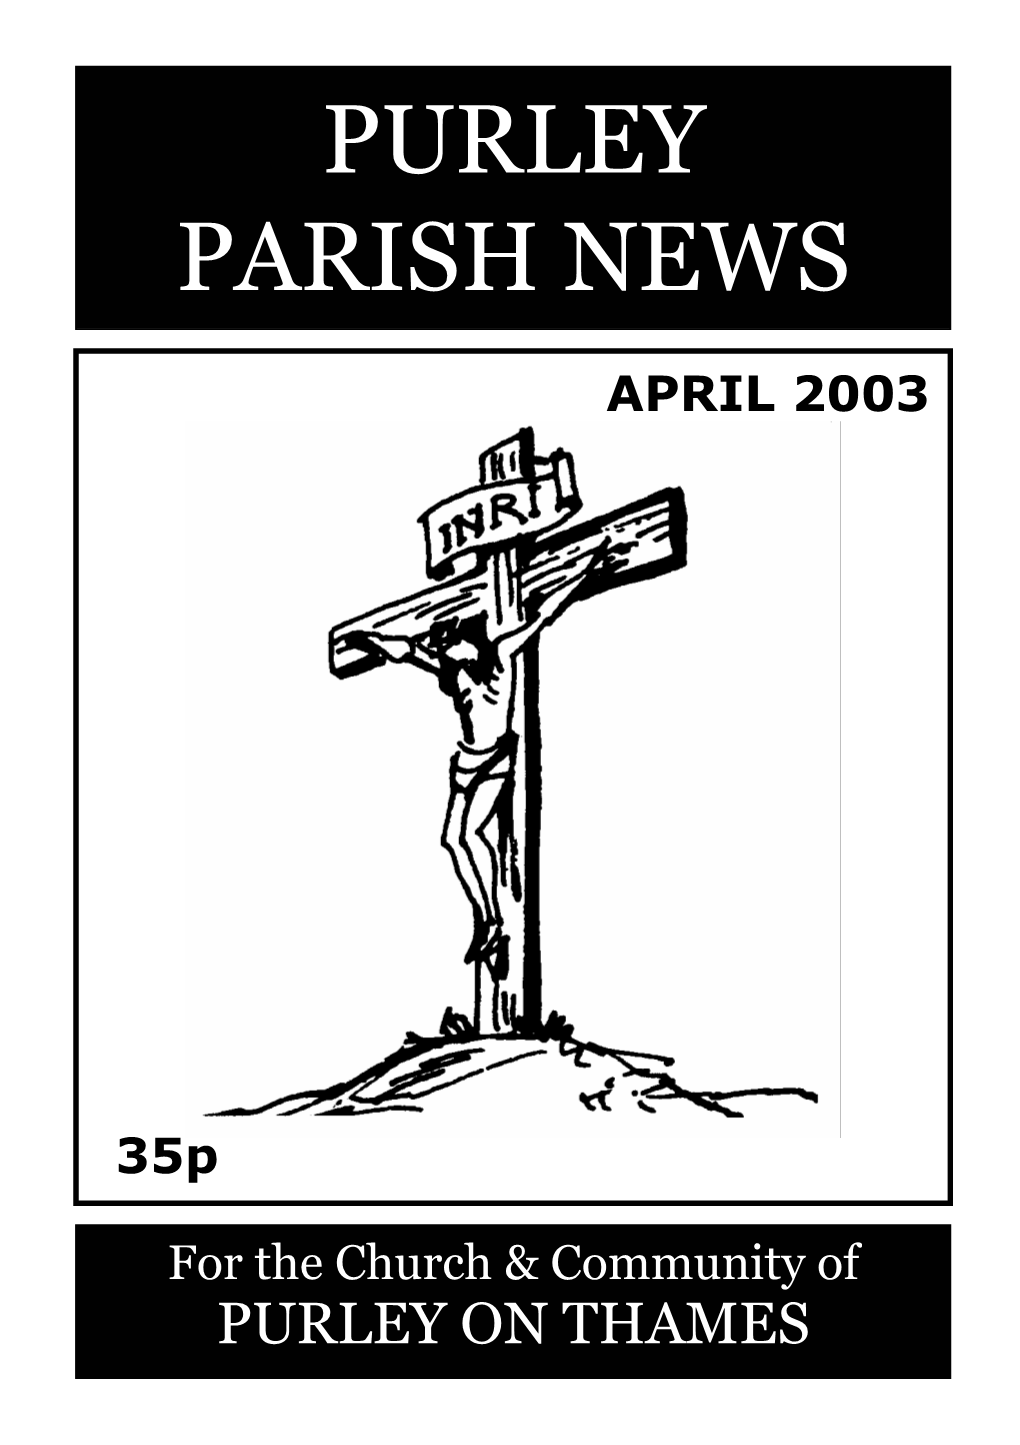 Purley Parish News As Editor and Apart from Trying to Persuade Some of You to Go to Church at 1:15 A.M